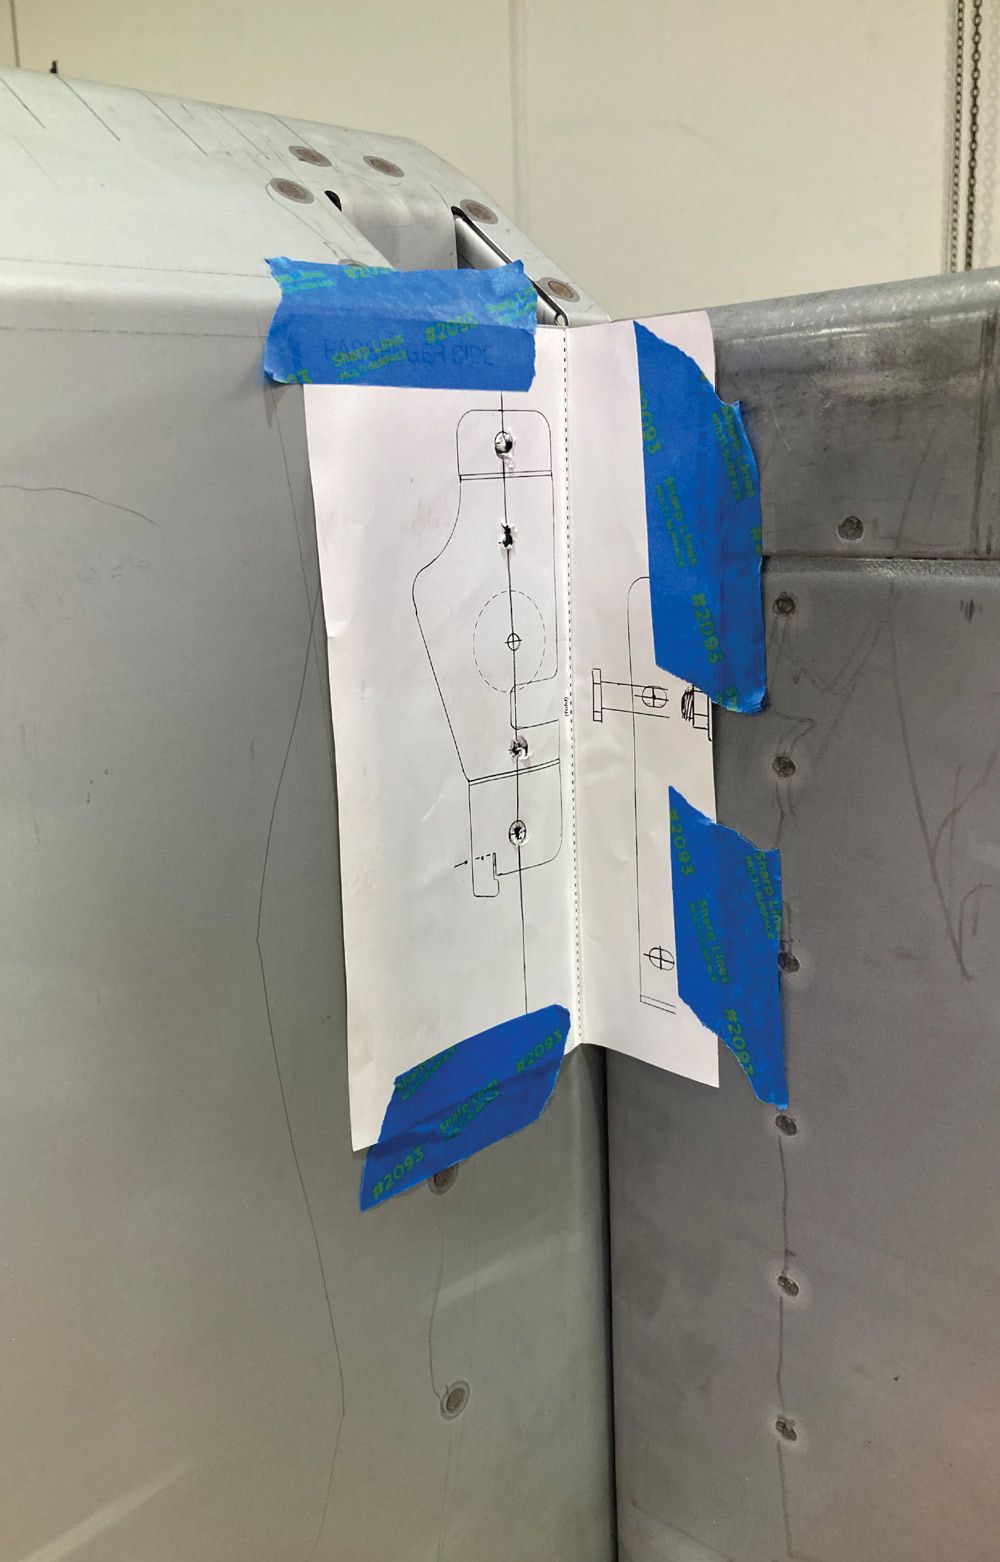 template taped to know where to drill holes